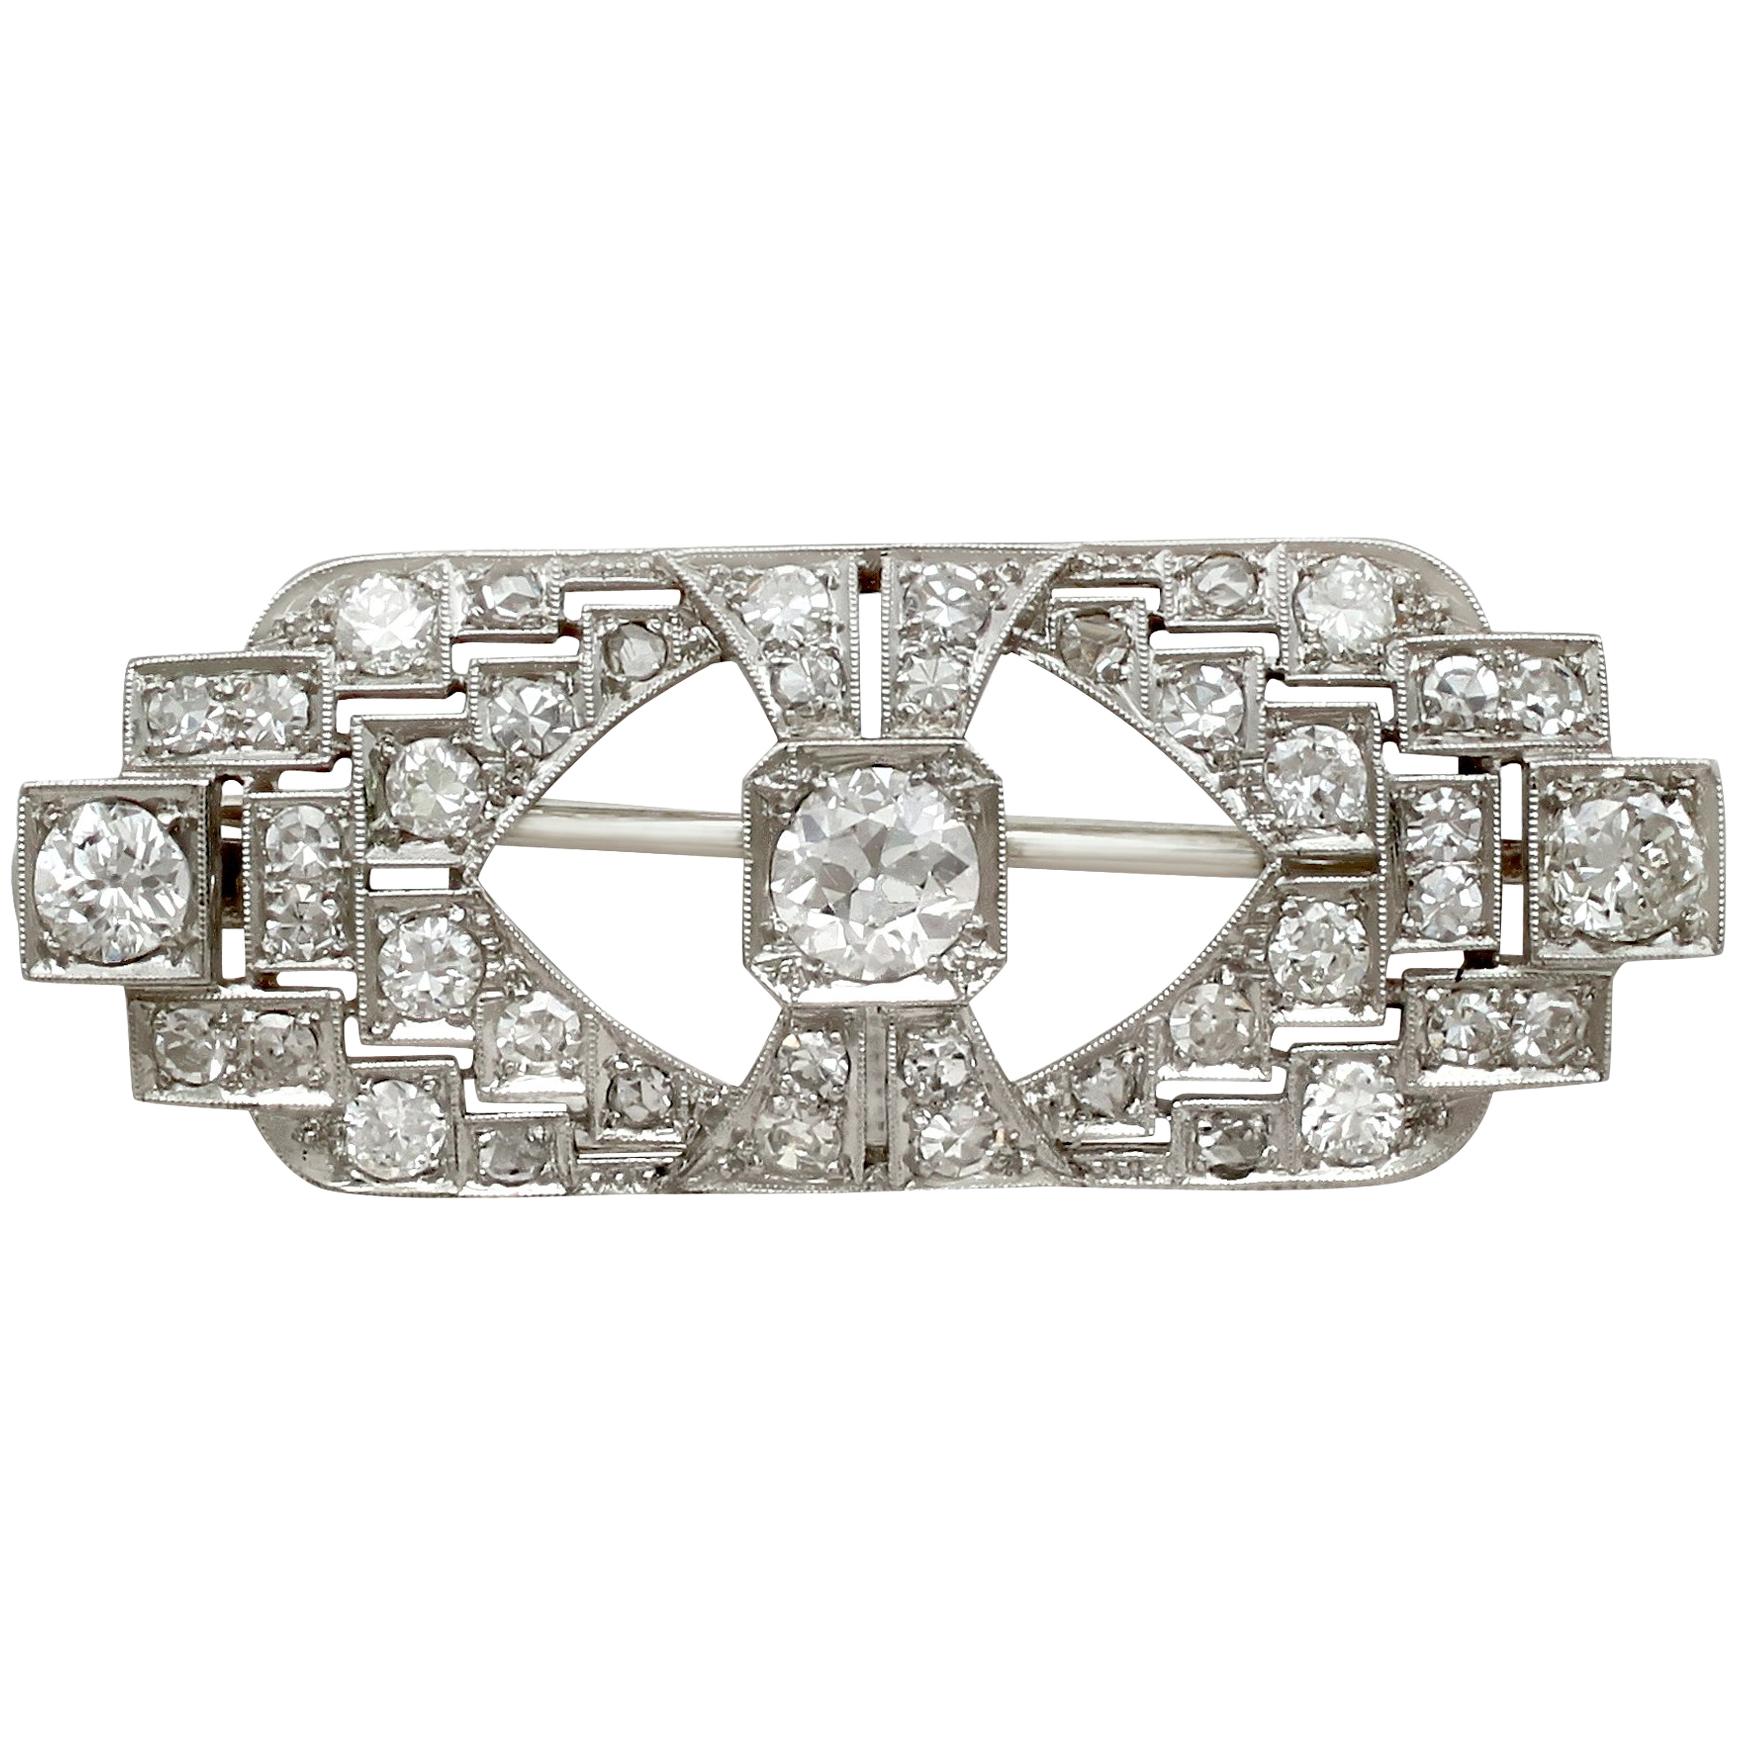 1930s Antique 2.23 Carat Diamond and White Gold Brooch